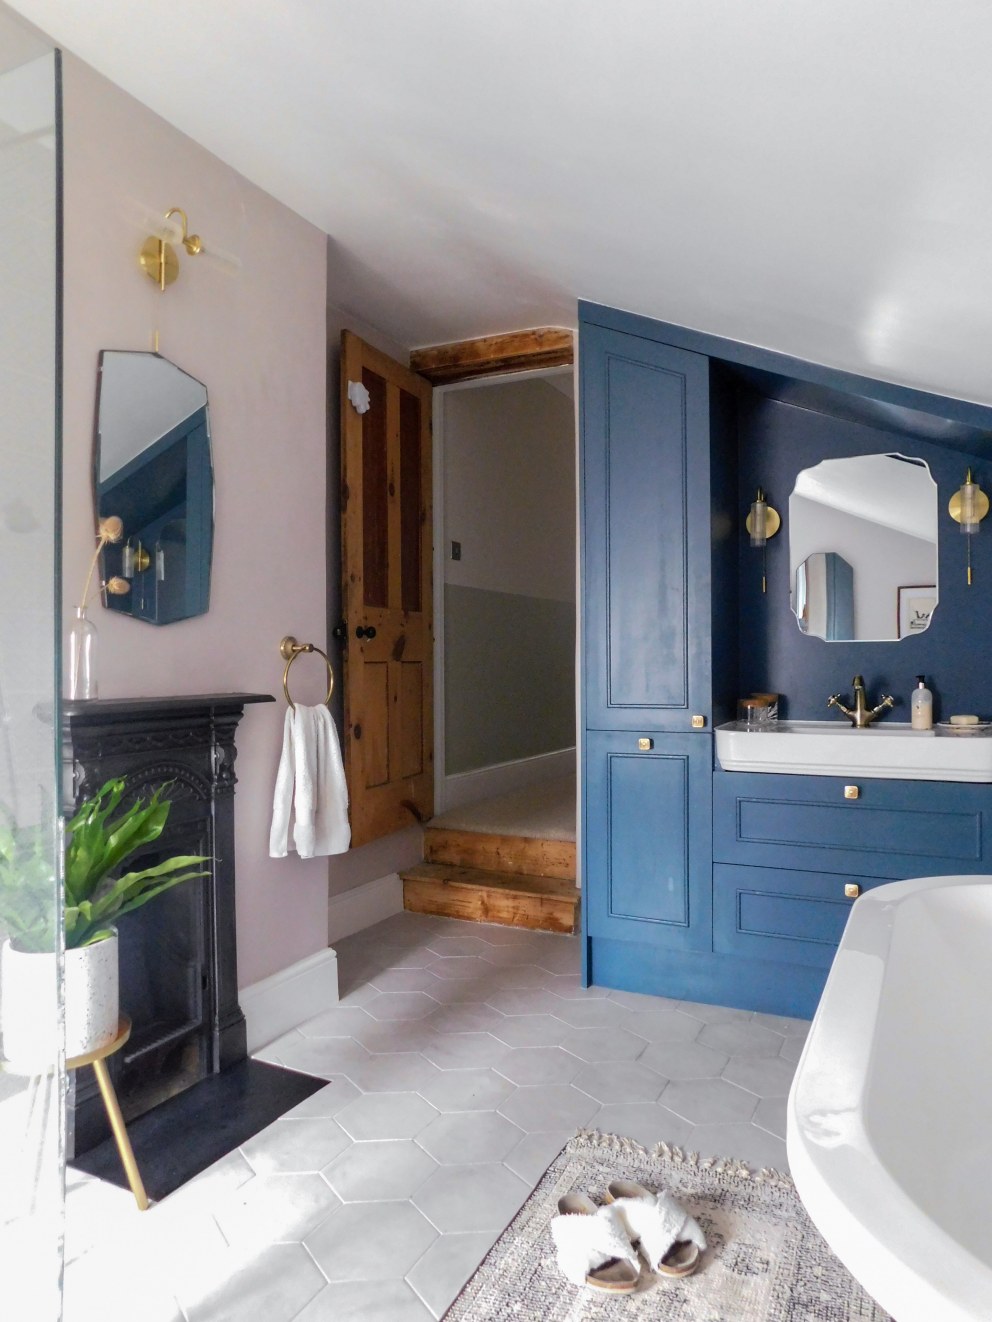 WD18 Bathroom | Refurbished Features & Bespoke Cabinetry | Interior Designers